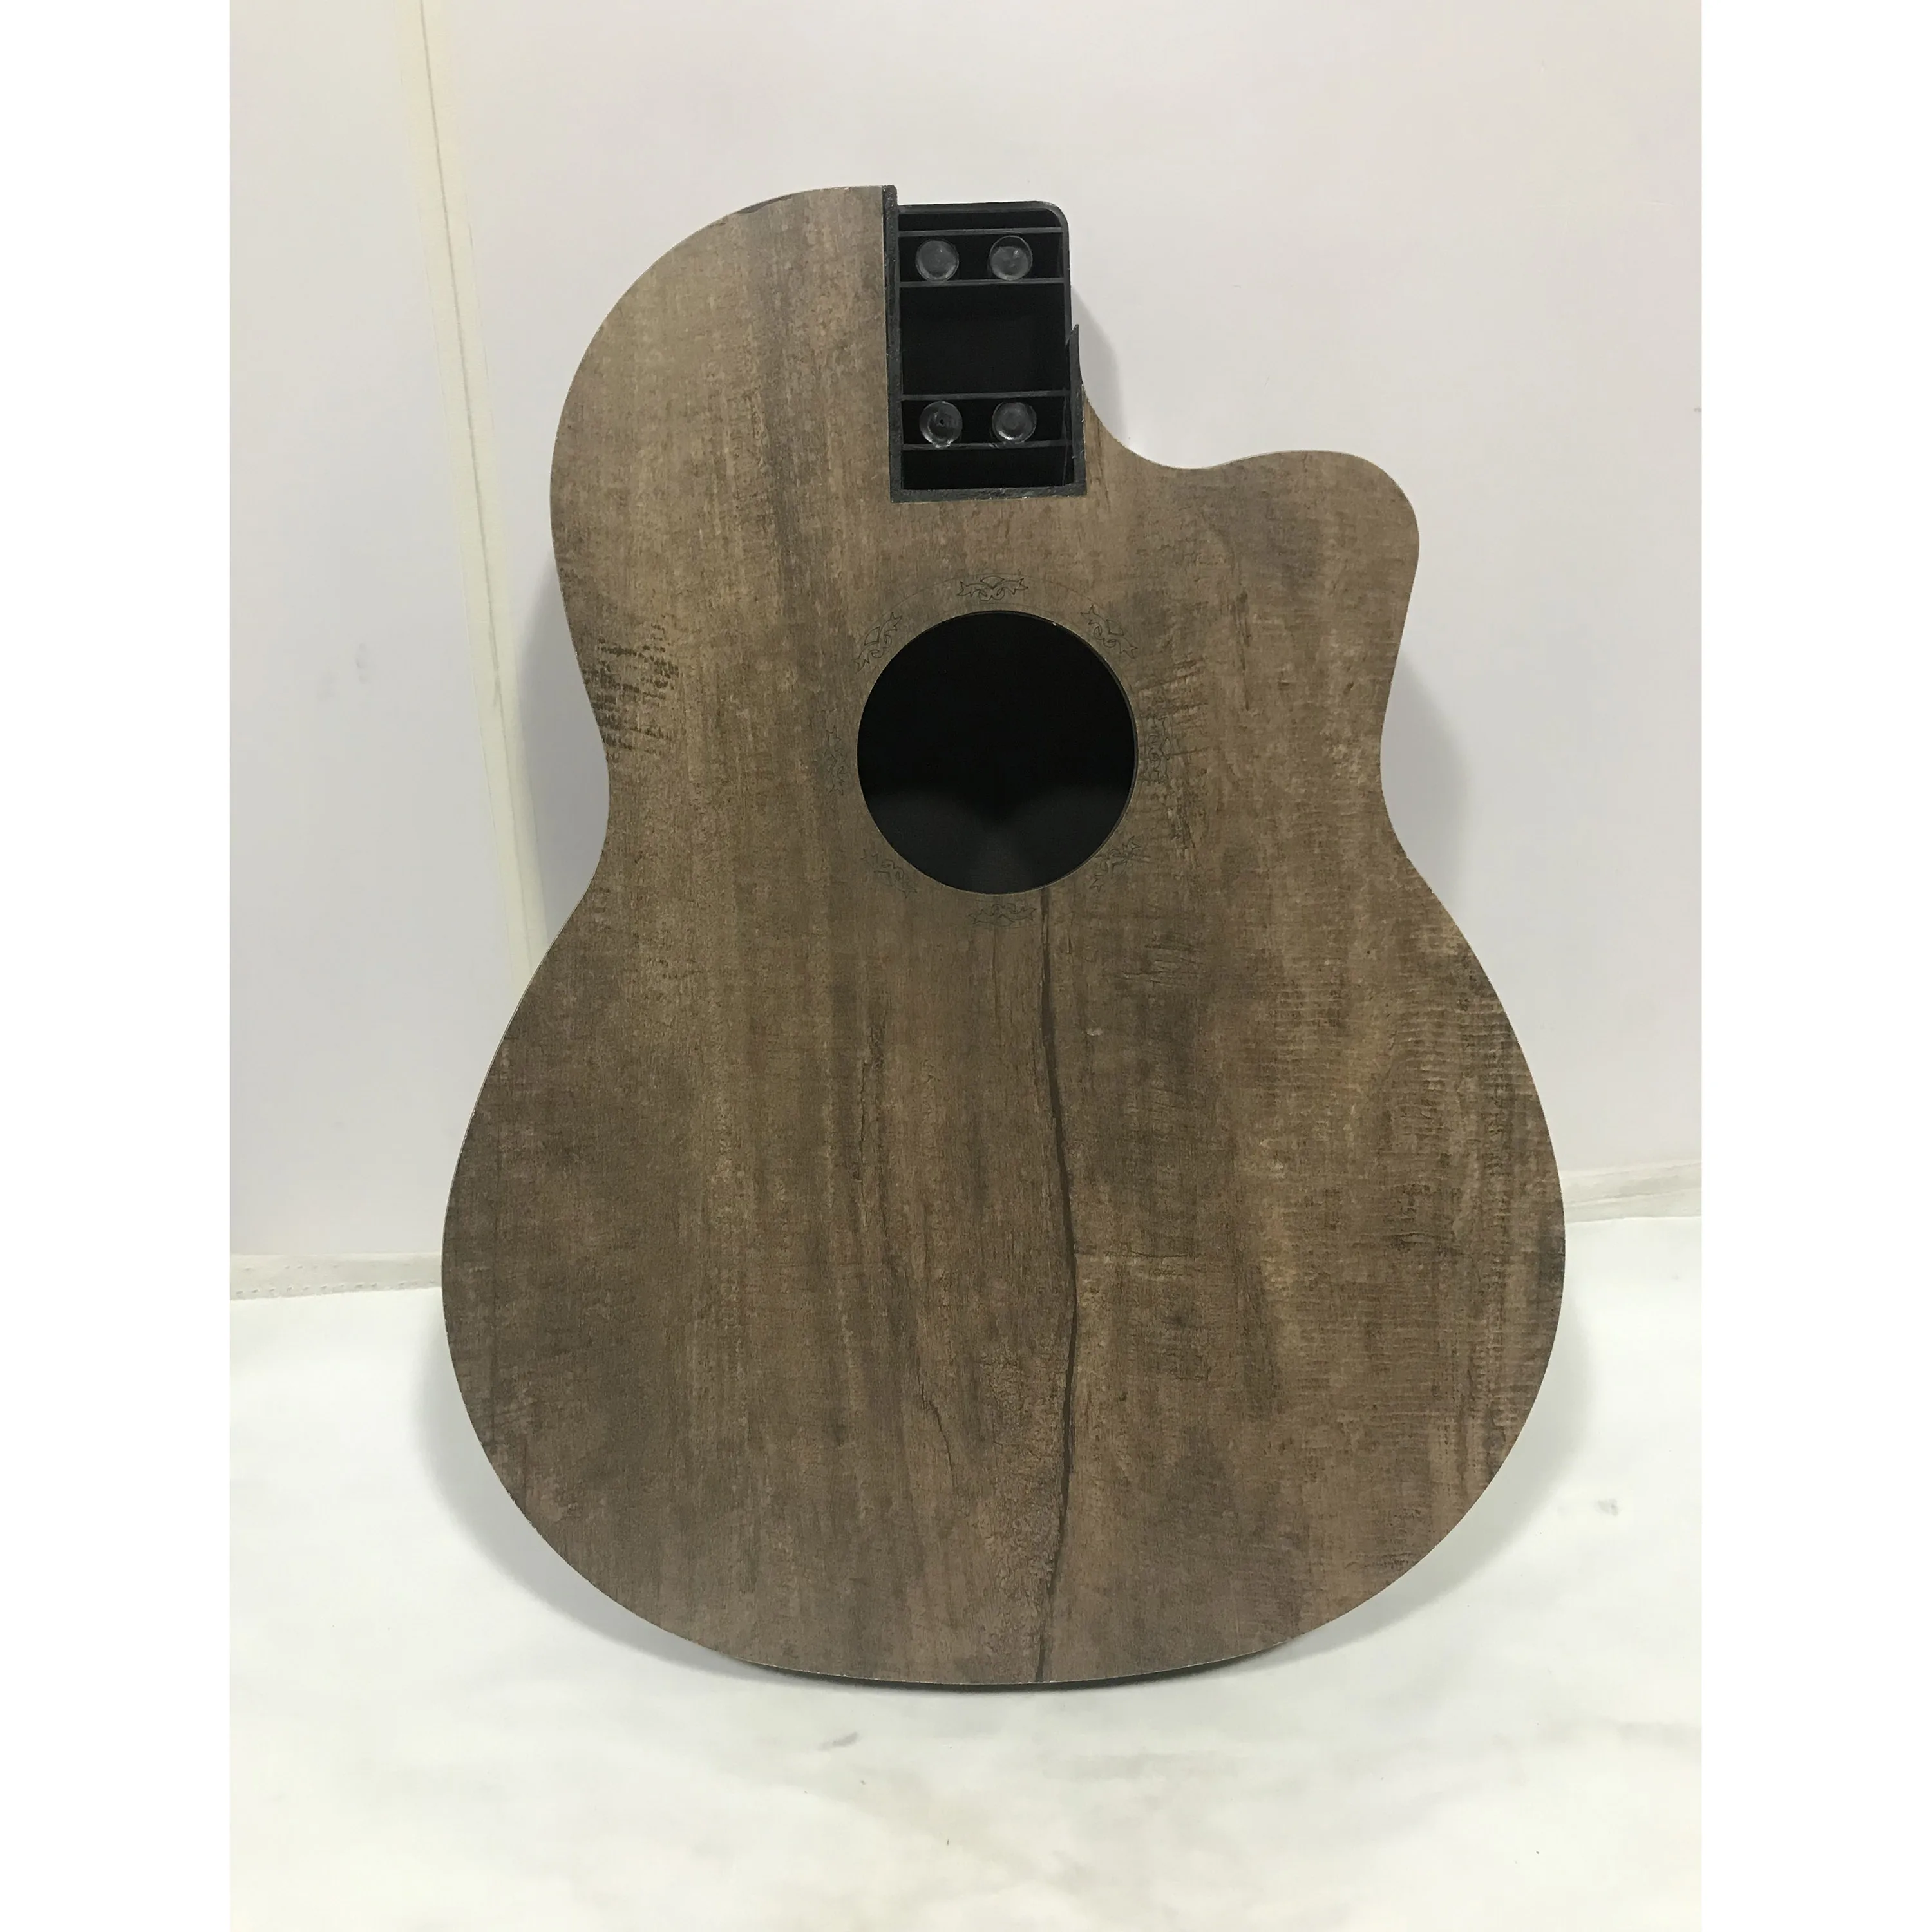 

1Pcs Plywood Electric Acoustic Guitar Body Finished 6 Strings Round Back Ovation Model 39Inch Cutaway Design Folk Guitarra Panel